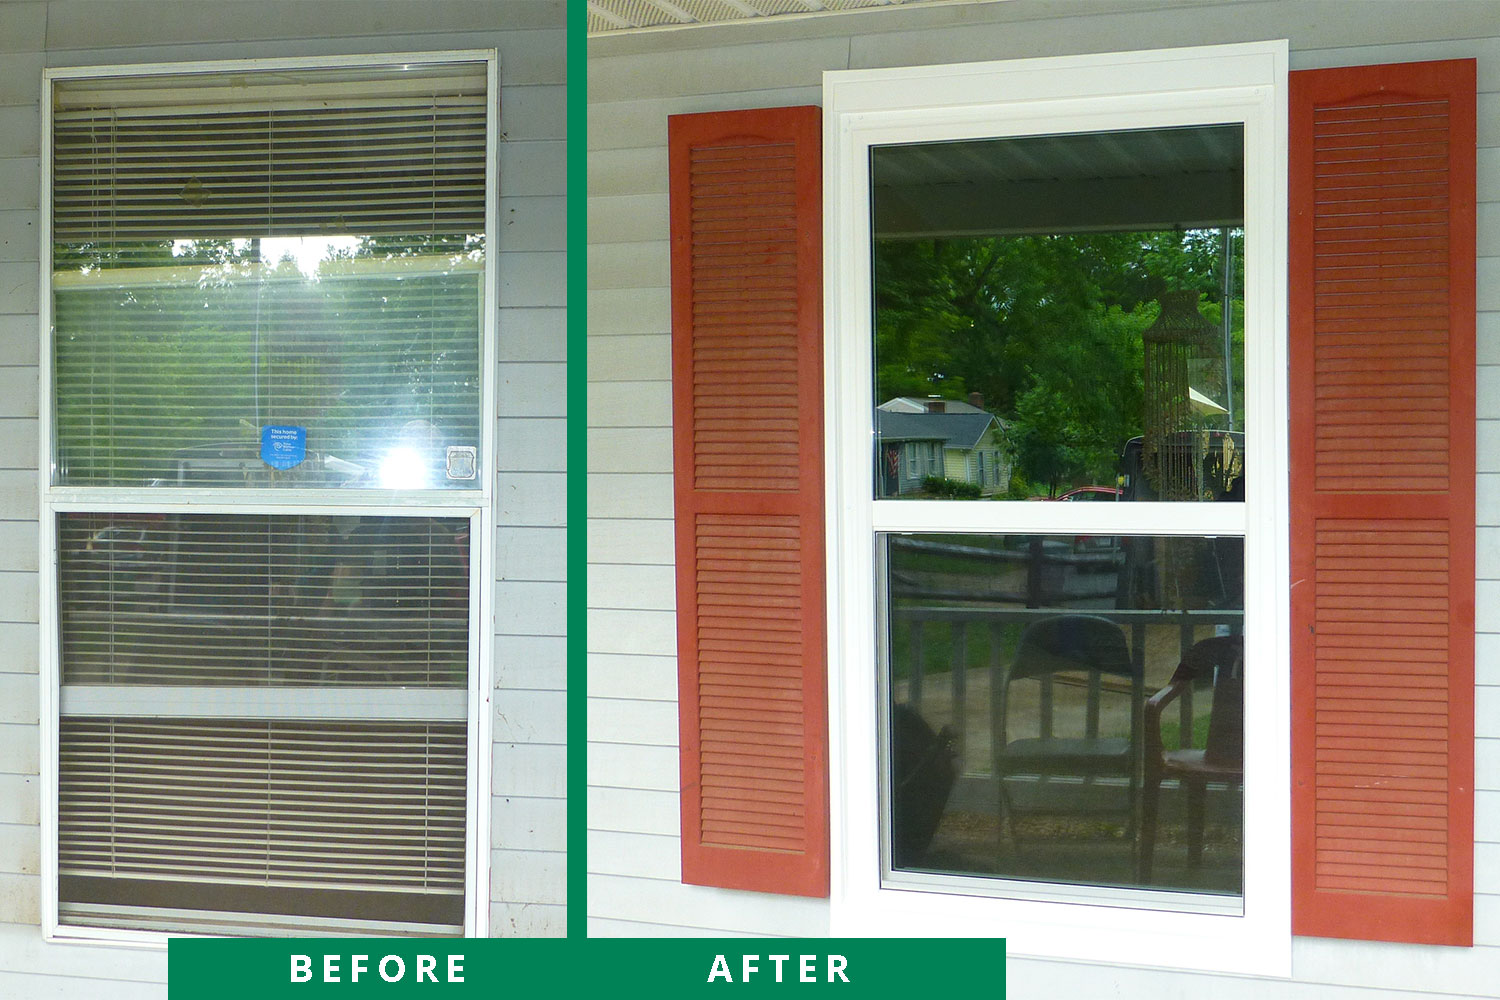 A before and after of a renovated window